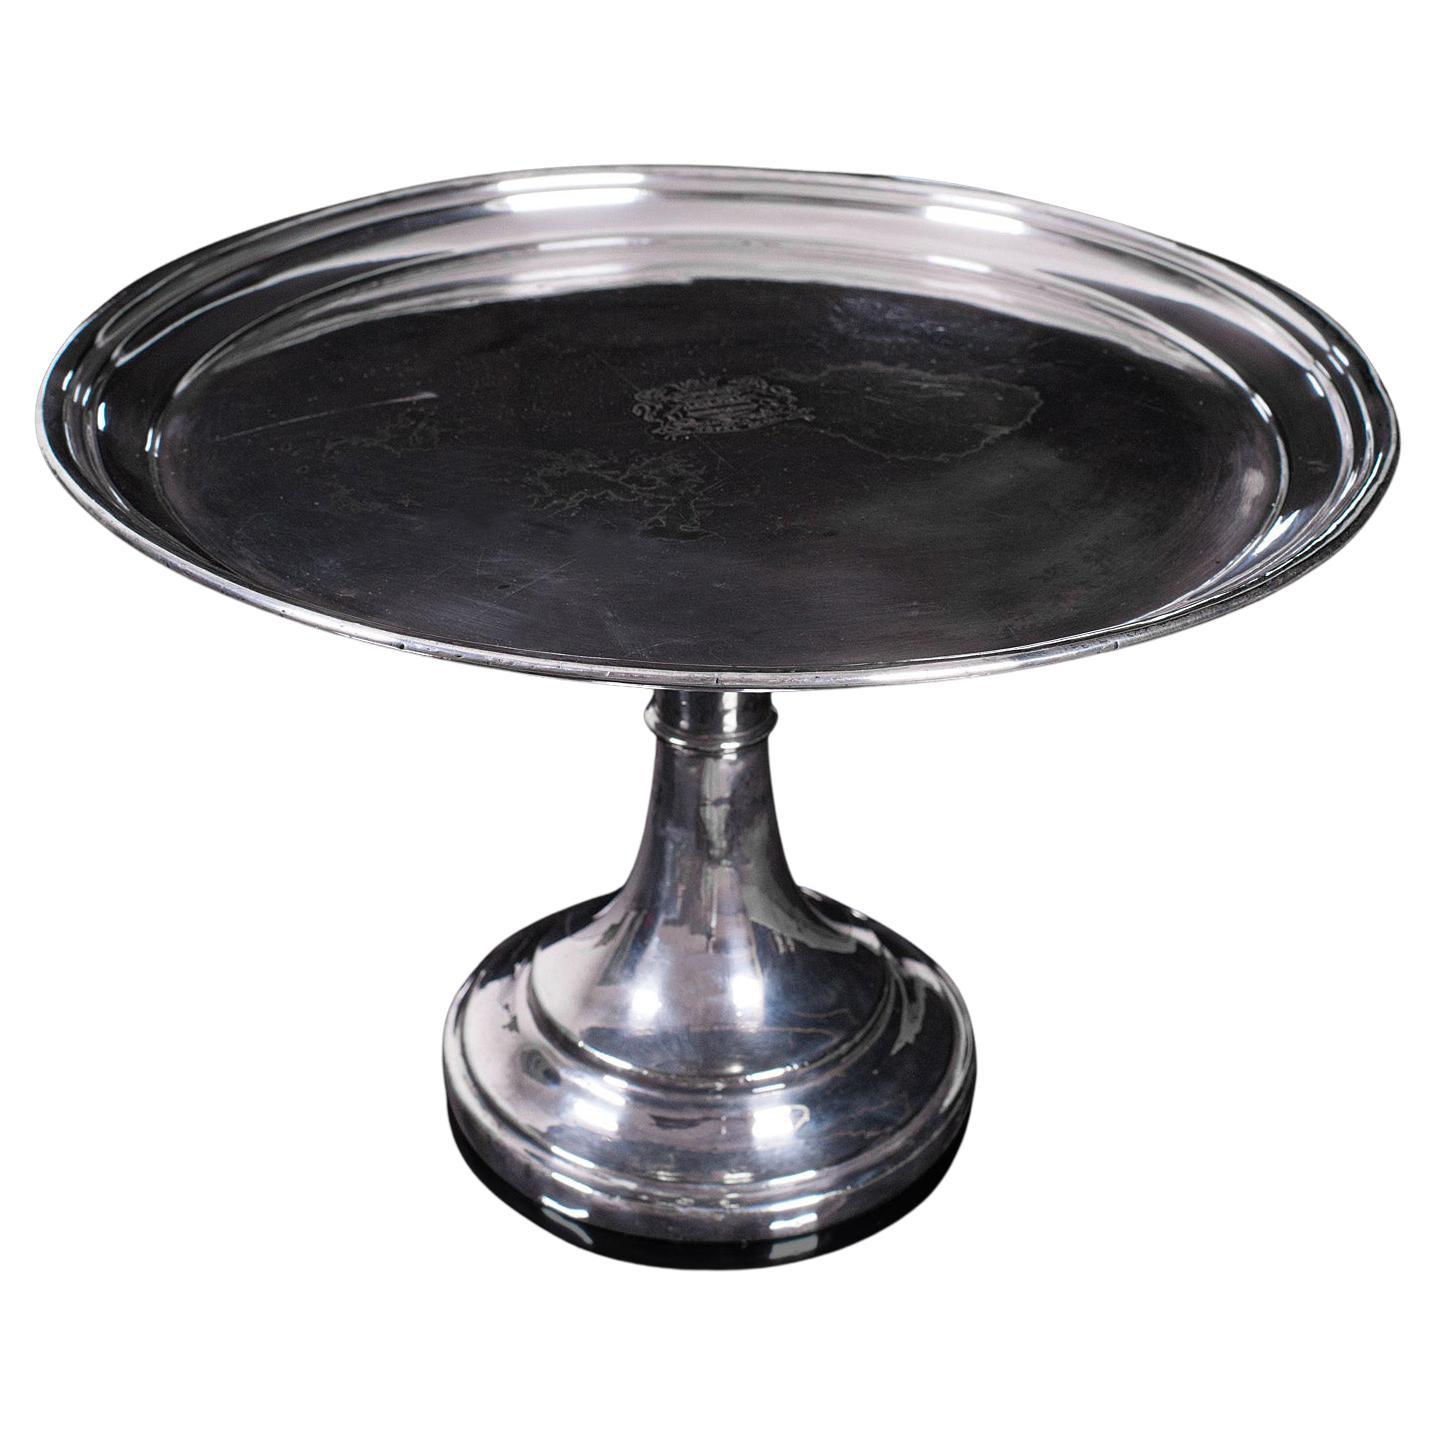 Antique Cake Stand, English, Silver Plate Serving Dish, Afternoon Tea, Victorian For Sale